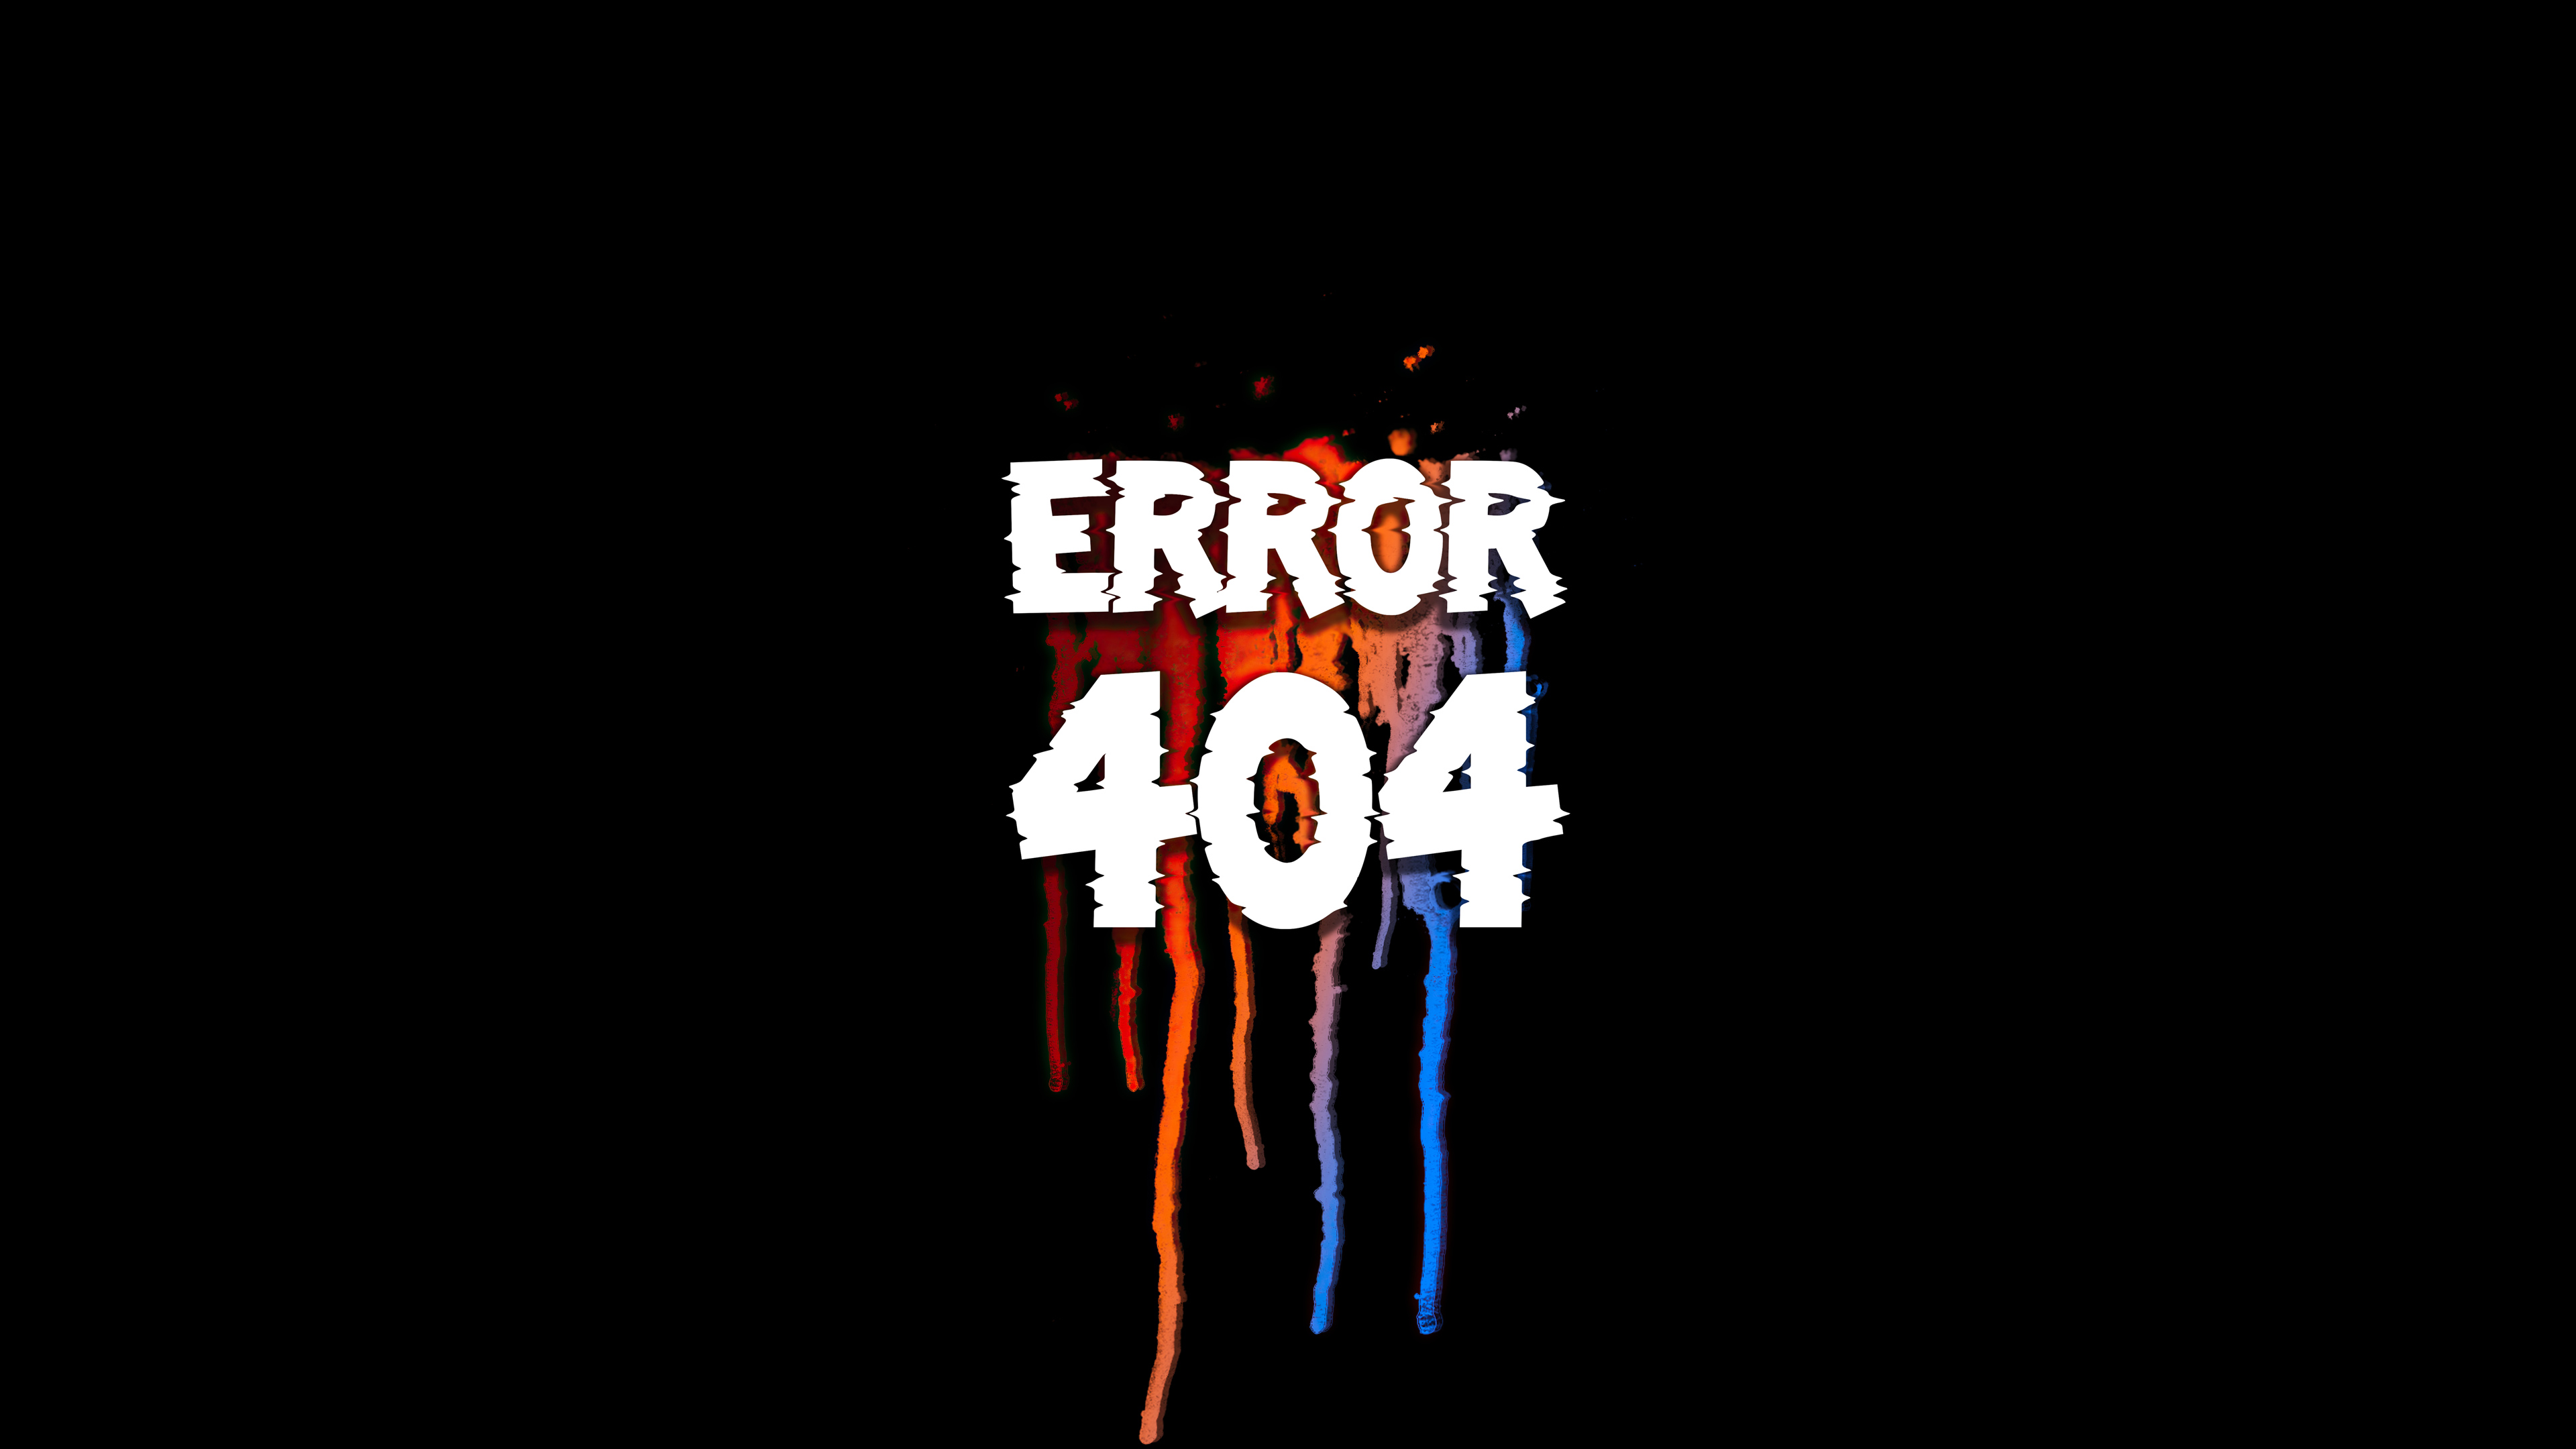 404 Not Found X Love Live Wallpapers